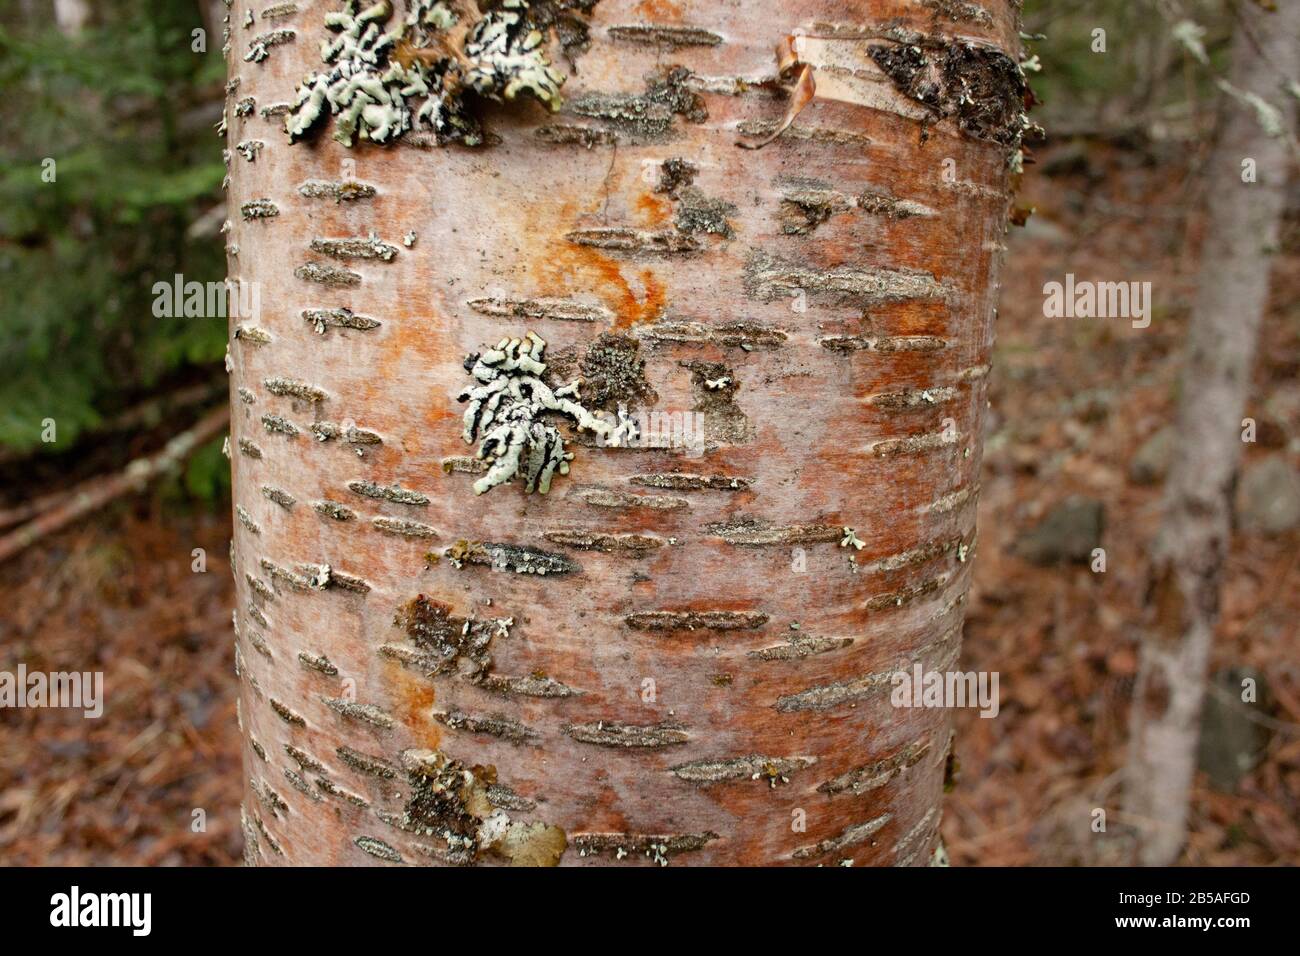 The trunk of a young Red Birch tree (Betula occidentalis) with leafy lichens on the bark, along Callahan Creek, in Troy, Montana.  Kingdom: Plantae Cl Stock Photo